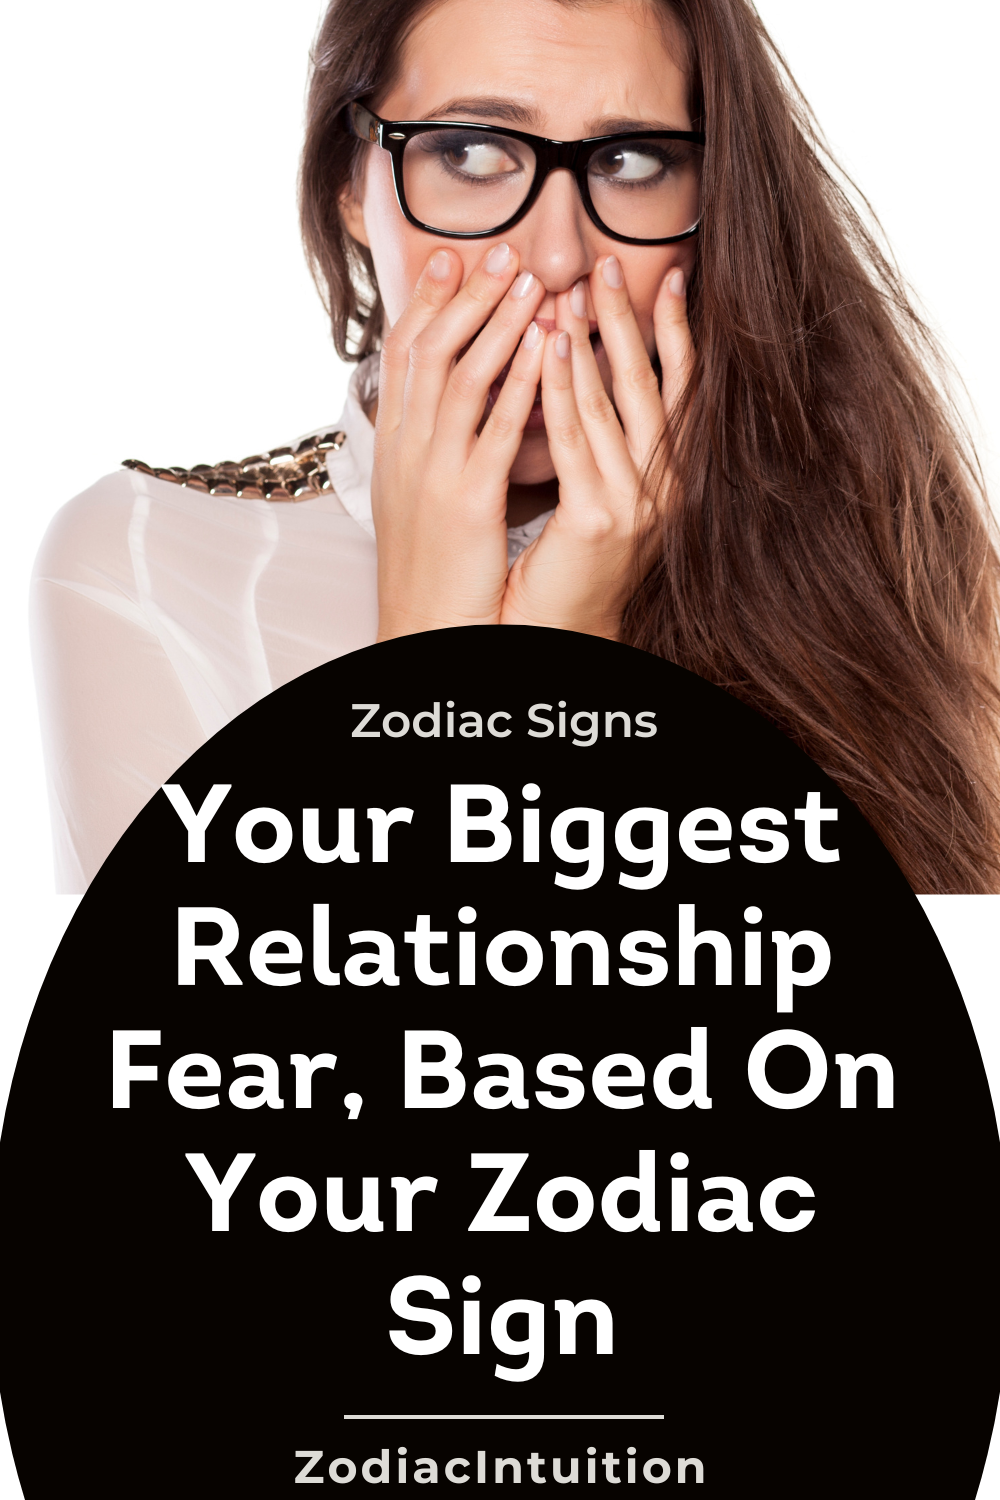 Your Biggest Relationship Fear, Based On Your Zodiac Sign